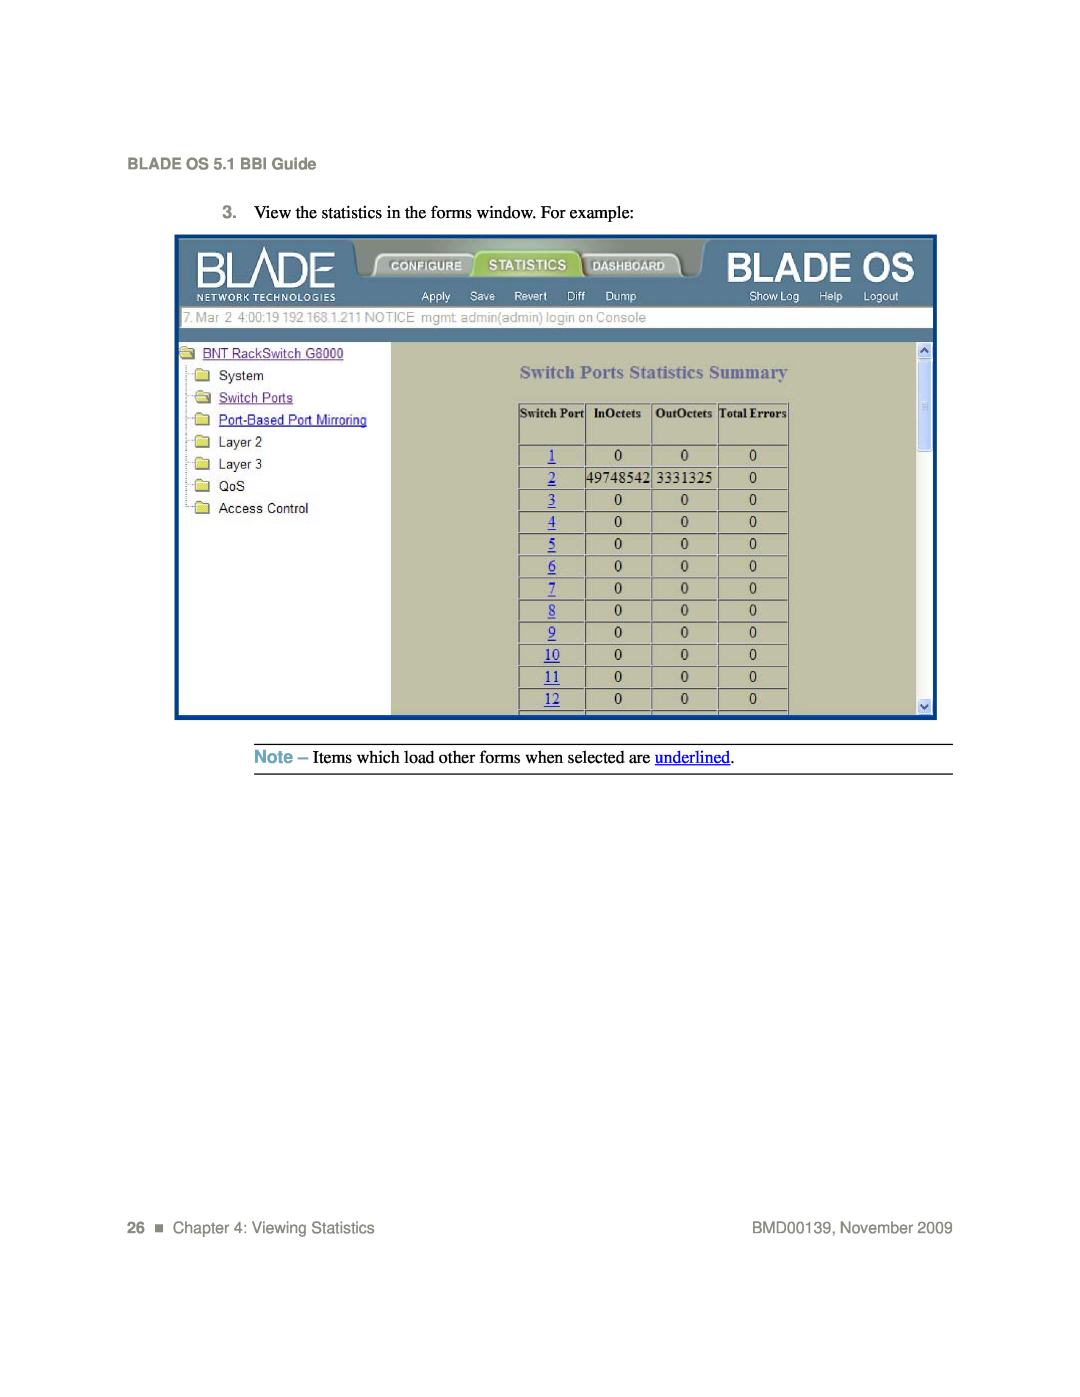 Blade ICE G8000 View the statistics in the forms window. For example, BLADE OS 5.1 BBI Guide, 26 „ Viewing Statistics 